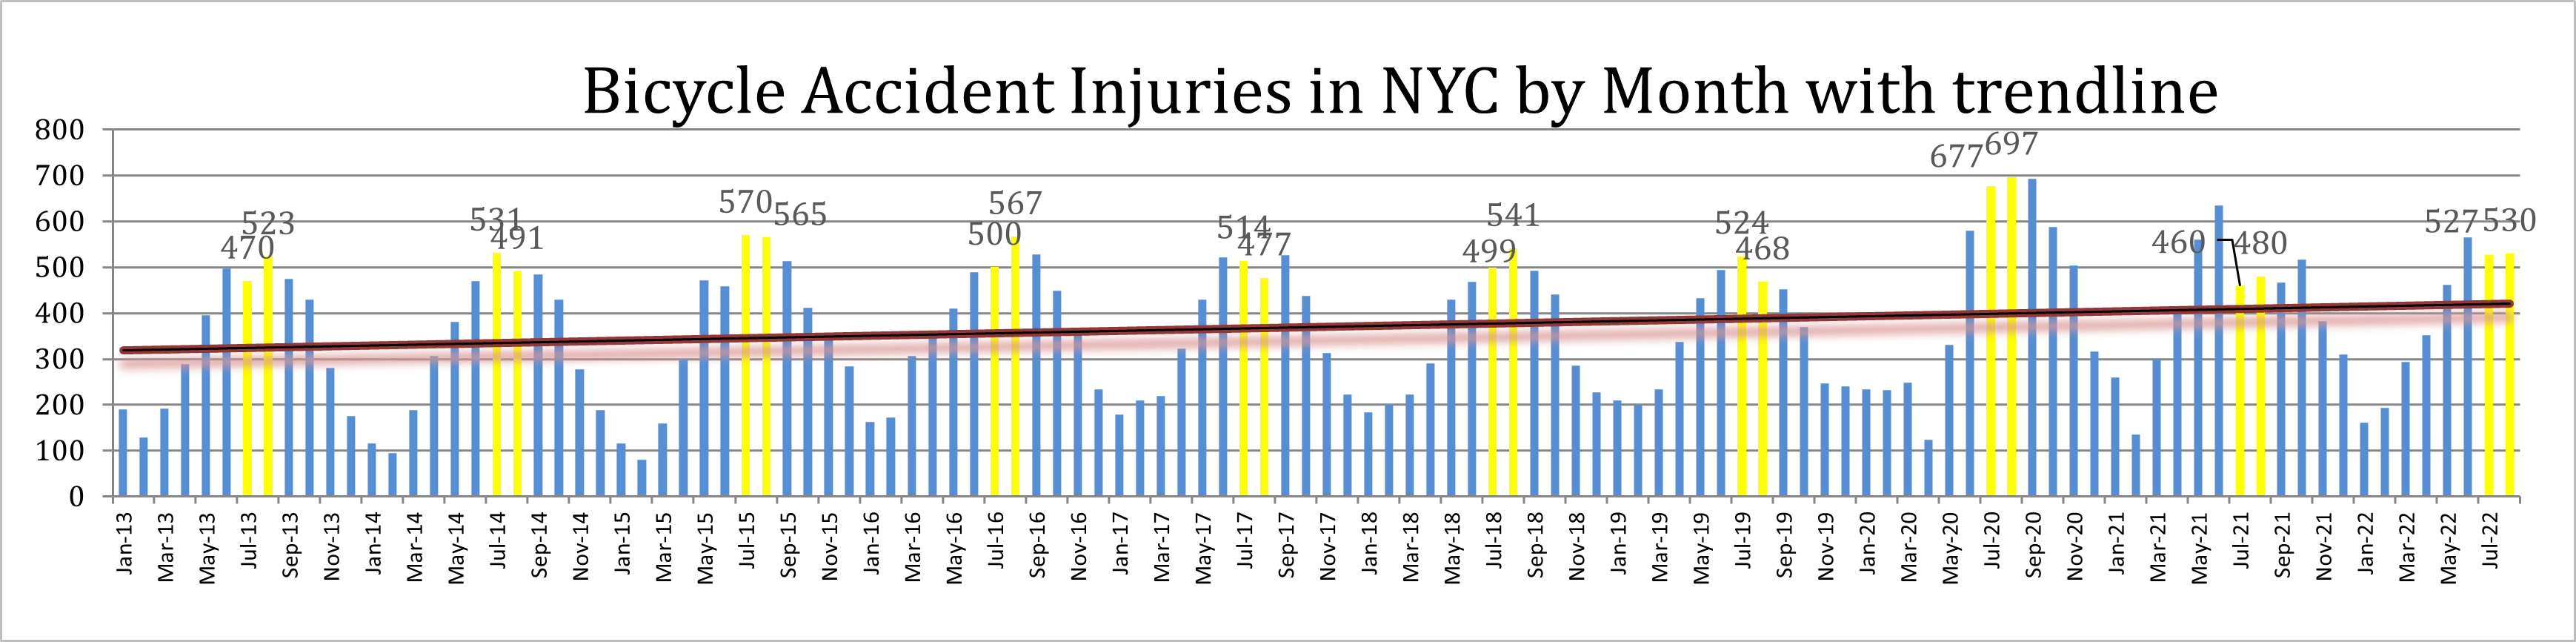 New York Bicycle Accident Injuries summer 2022